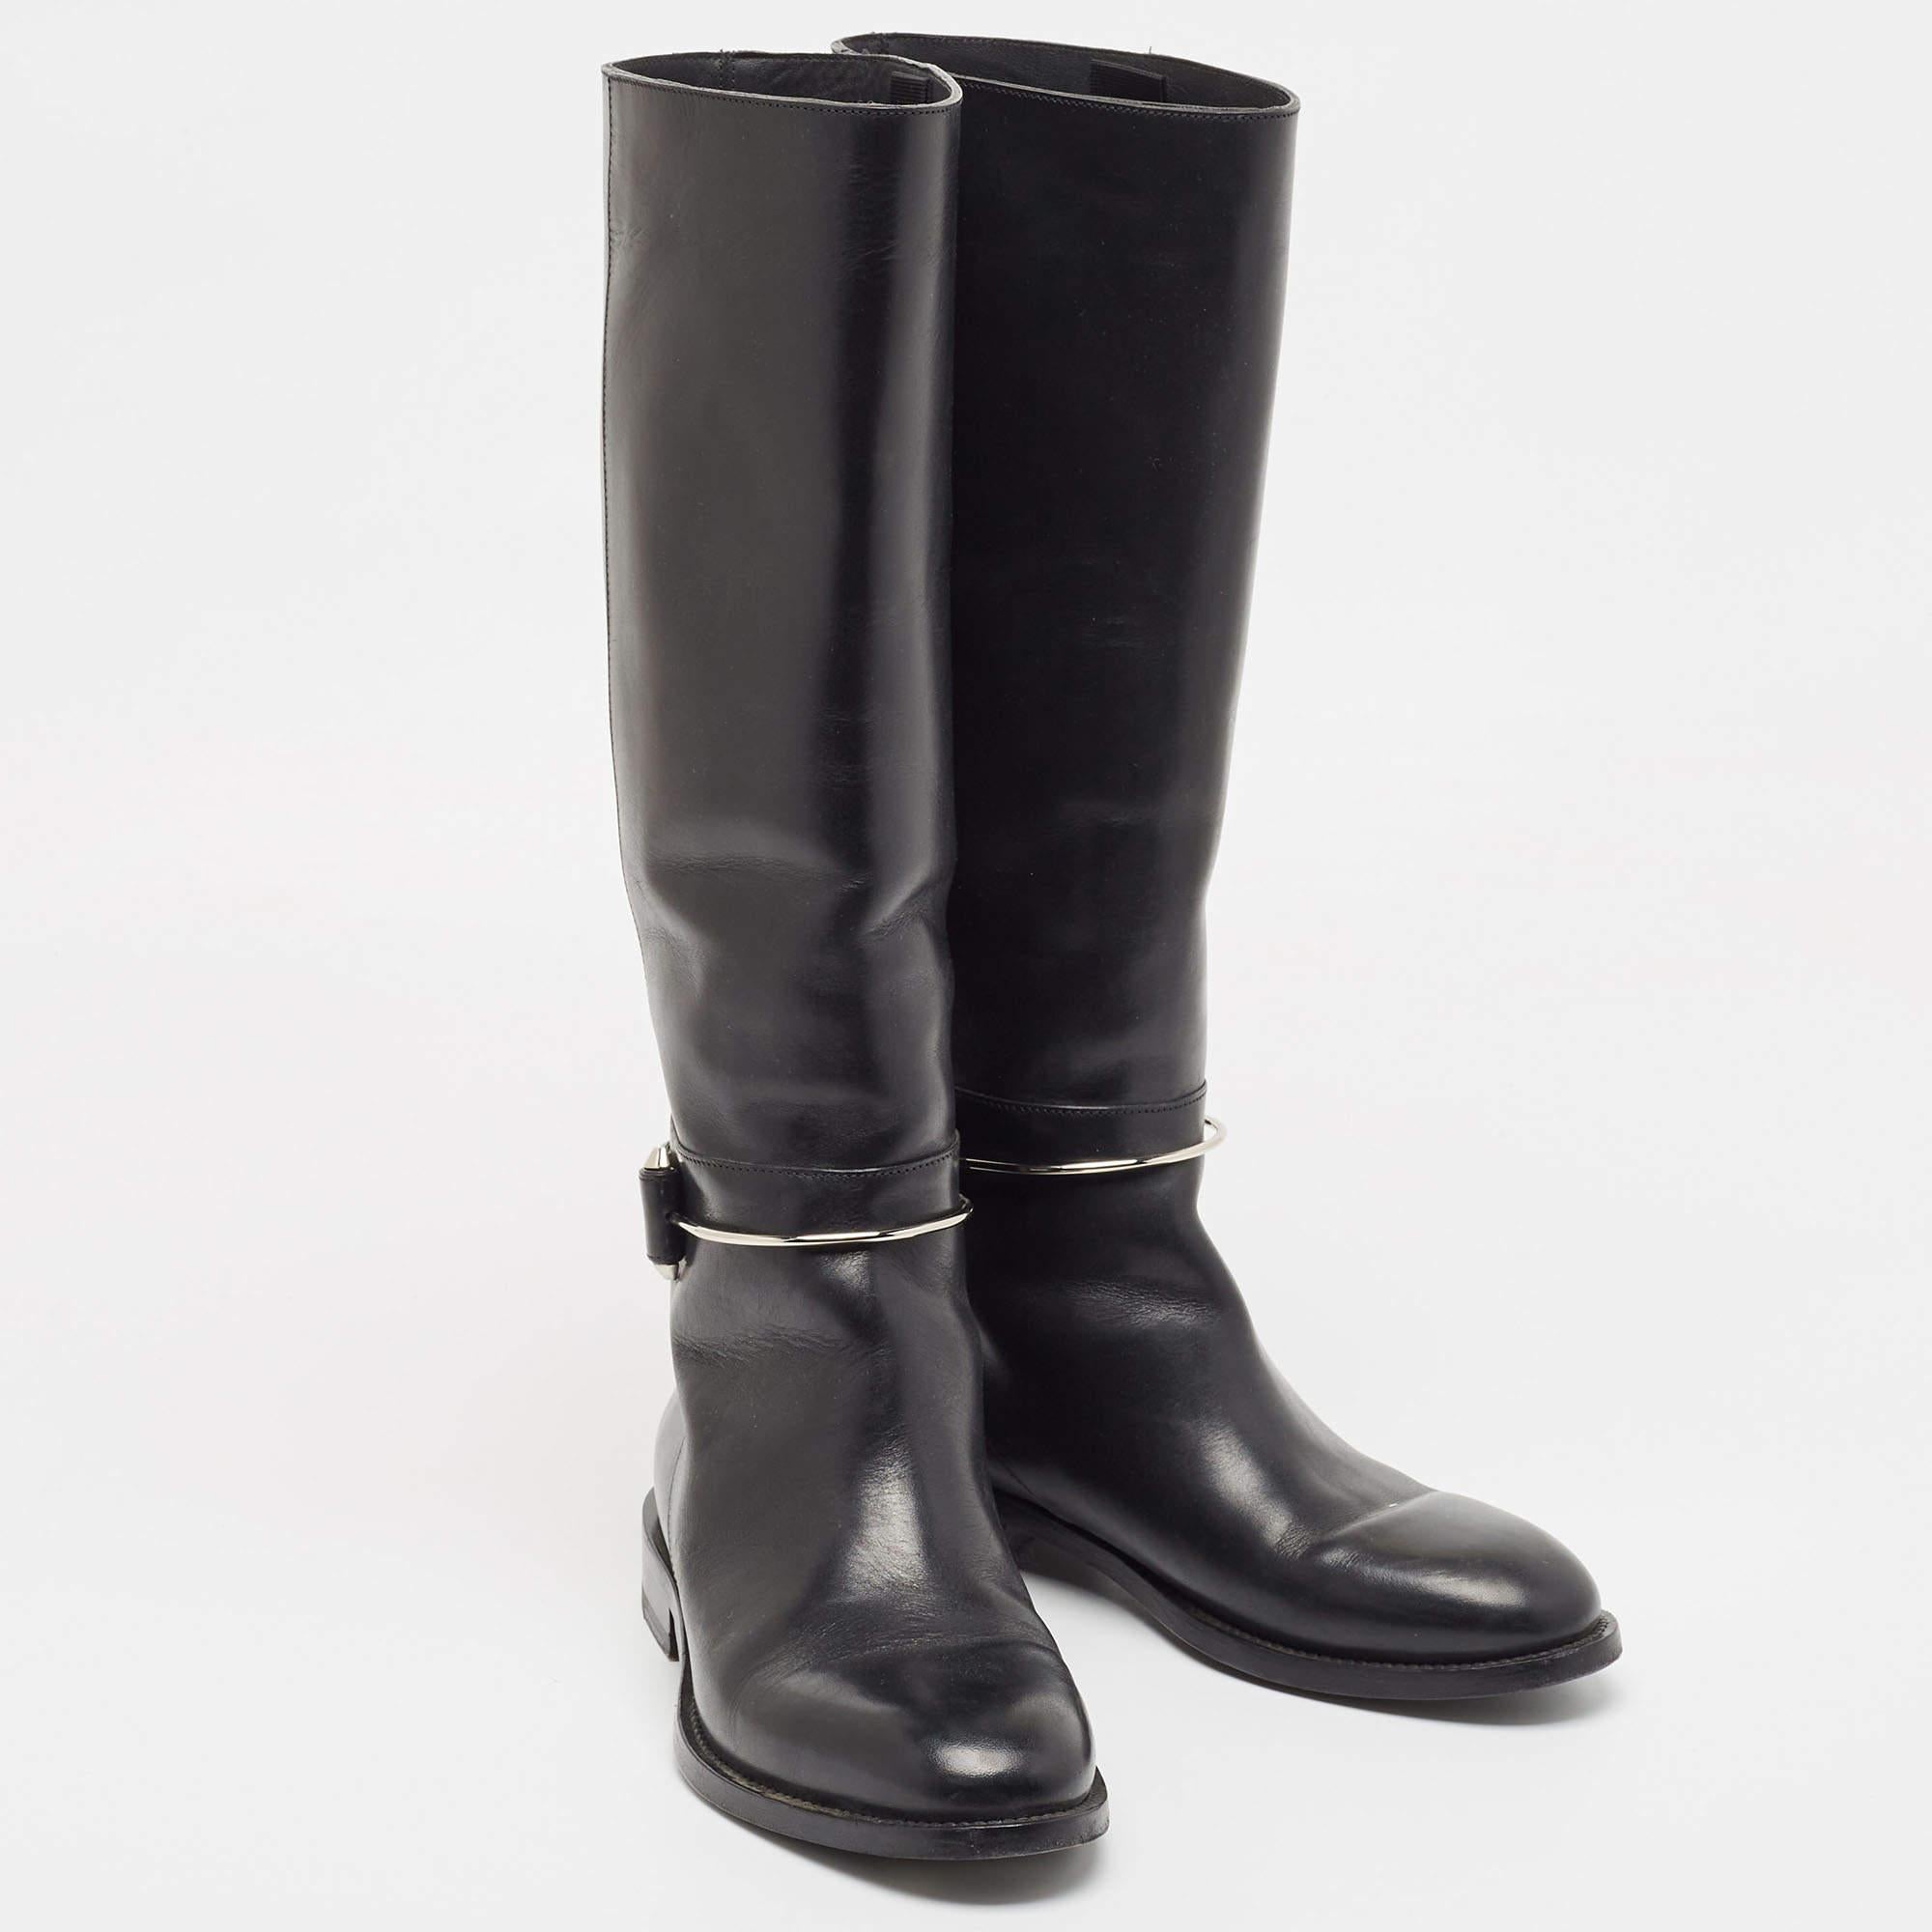 Enjoy the most fashionable days with these Balenciaga knee-length boots. Modern in design and craftsmanship, they are fashioned to keep you comfortable and chic!

